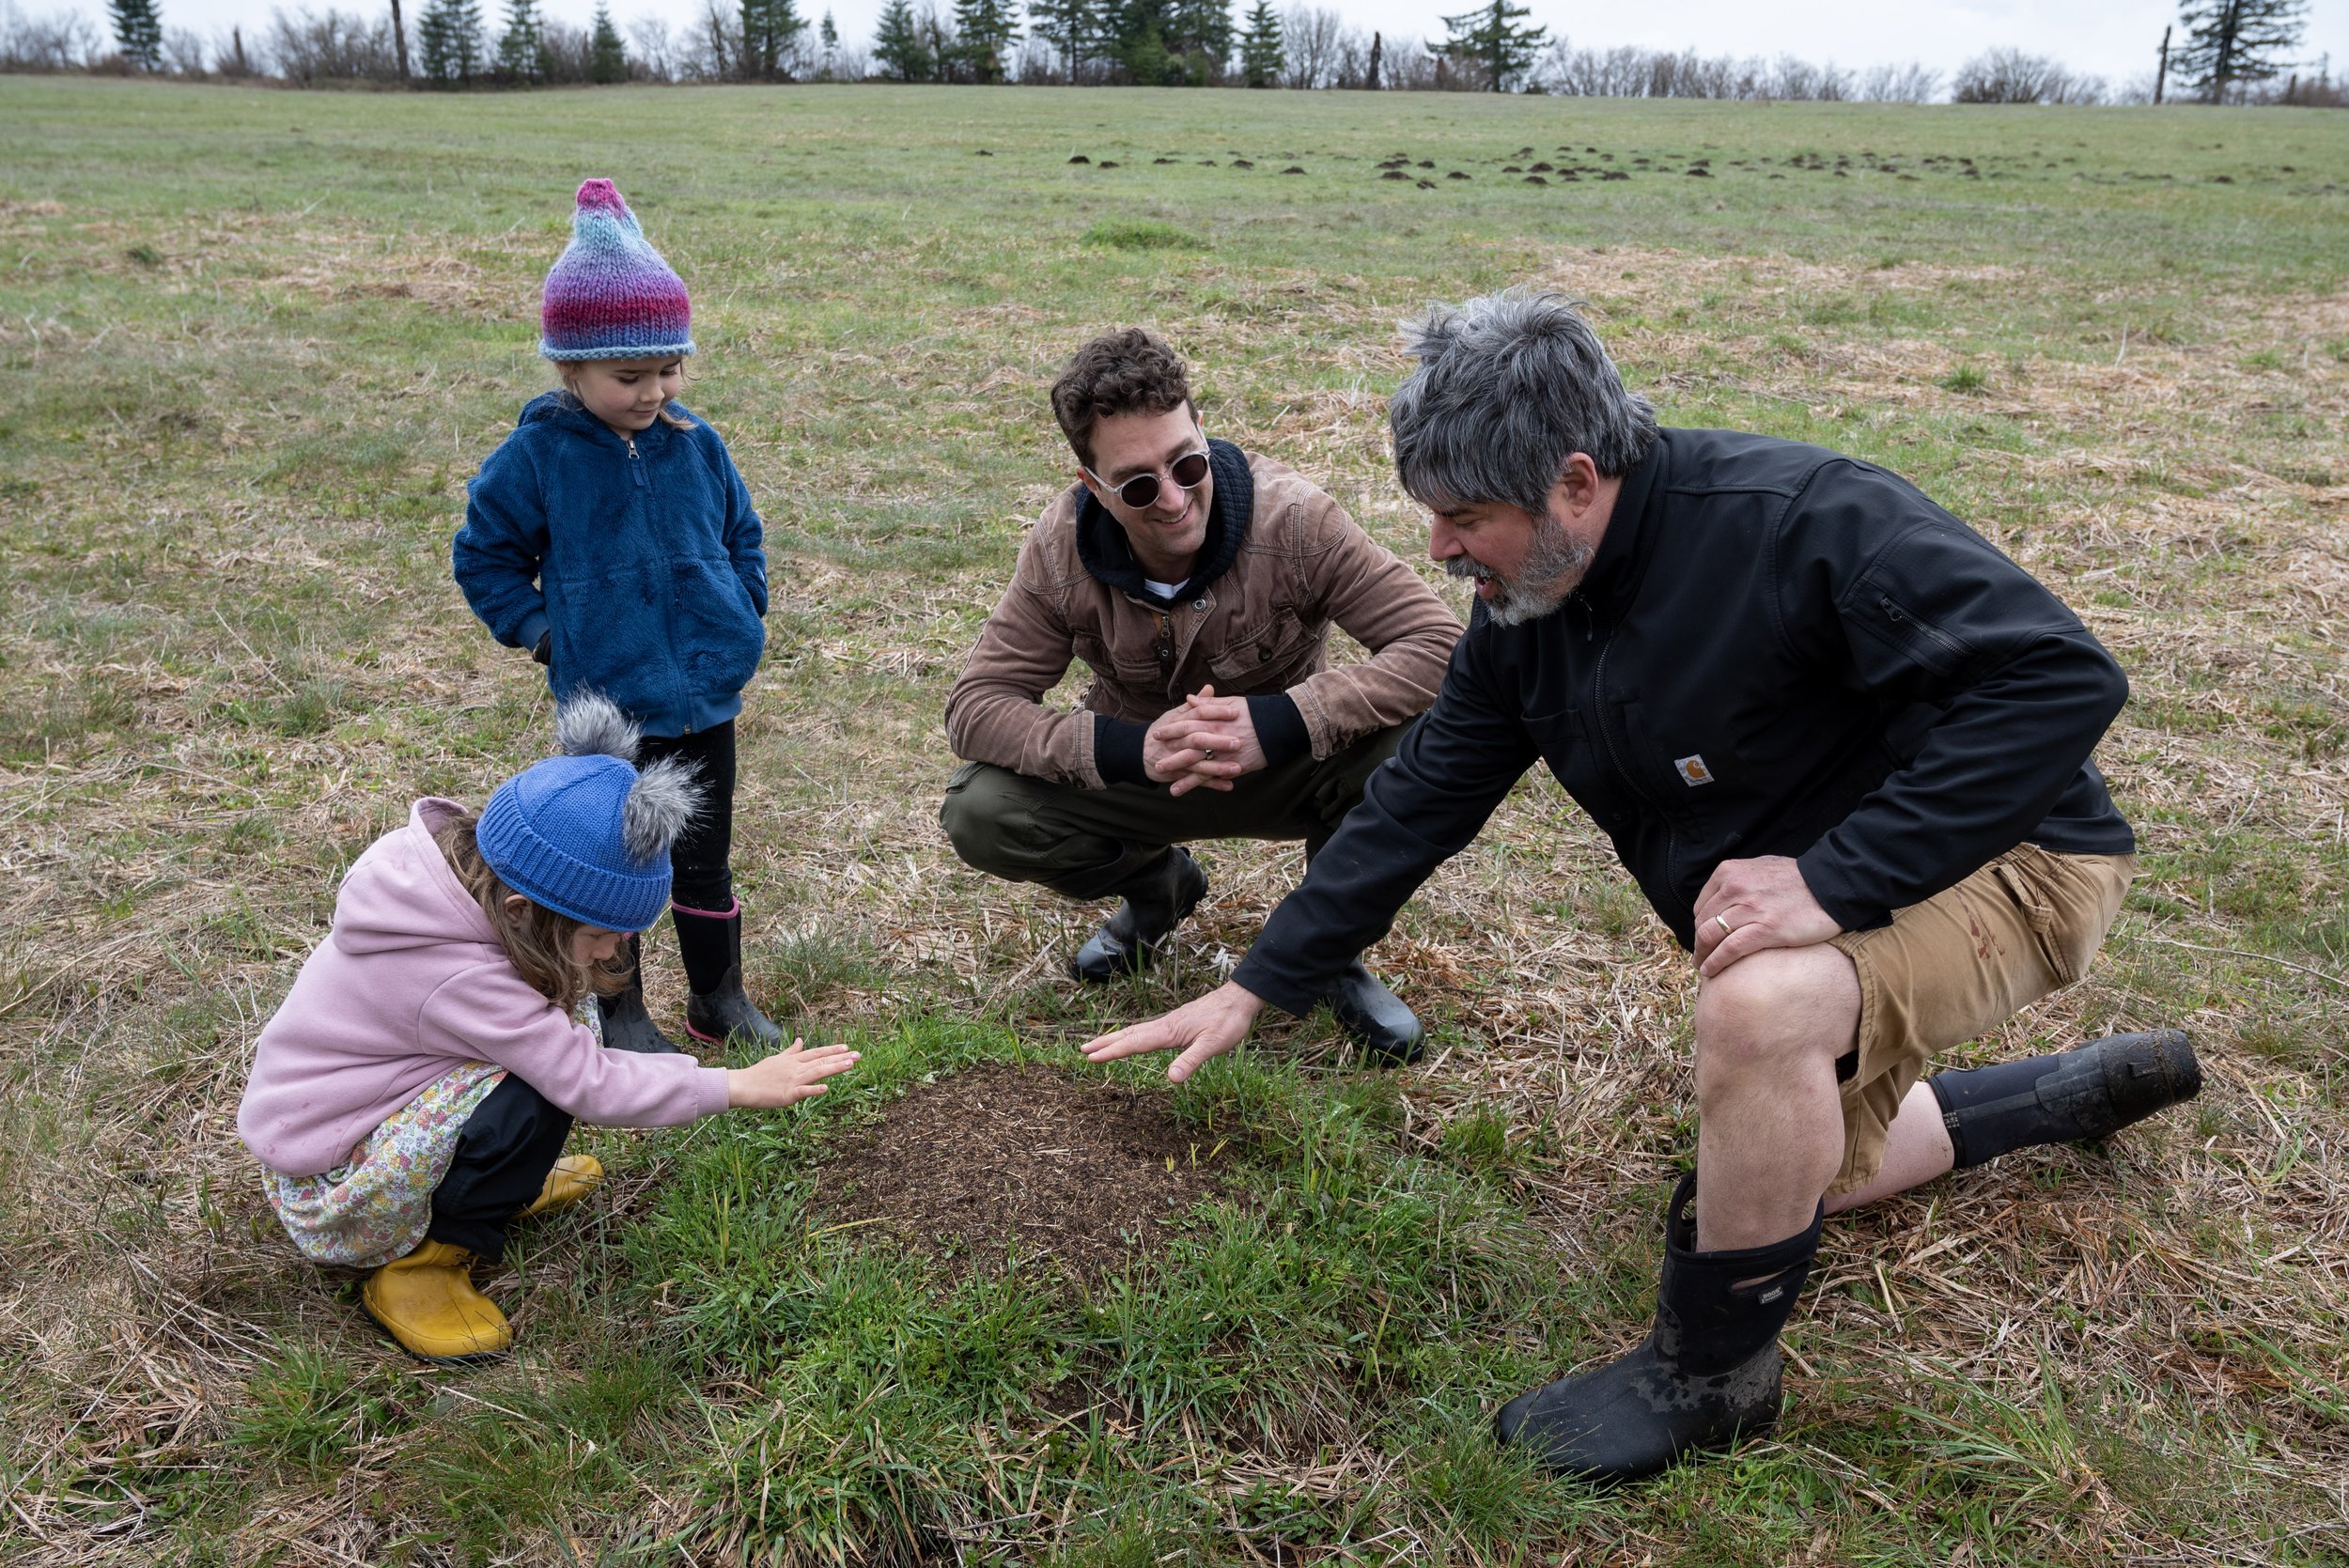 Two adults and two children exploring the Land